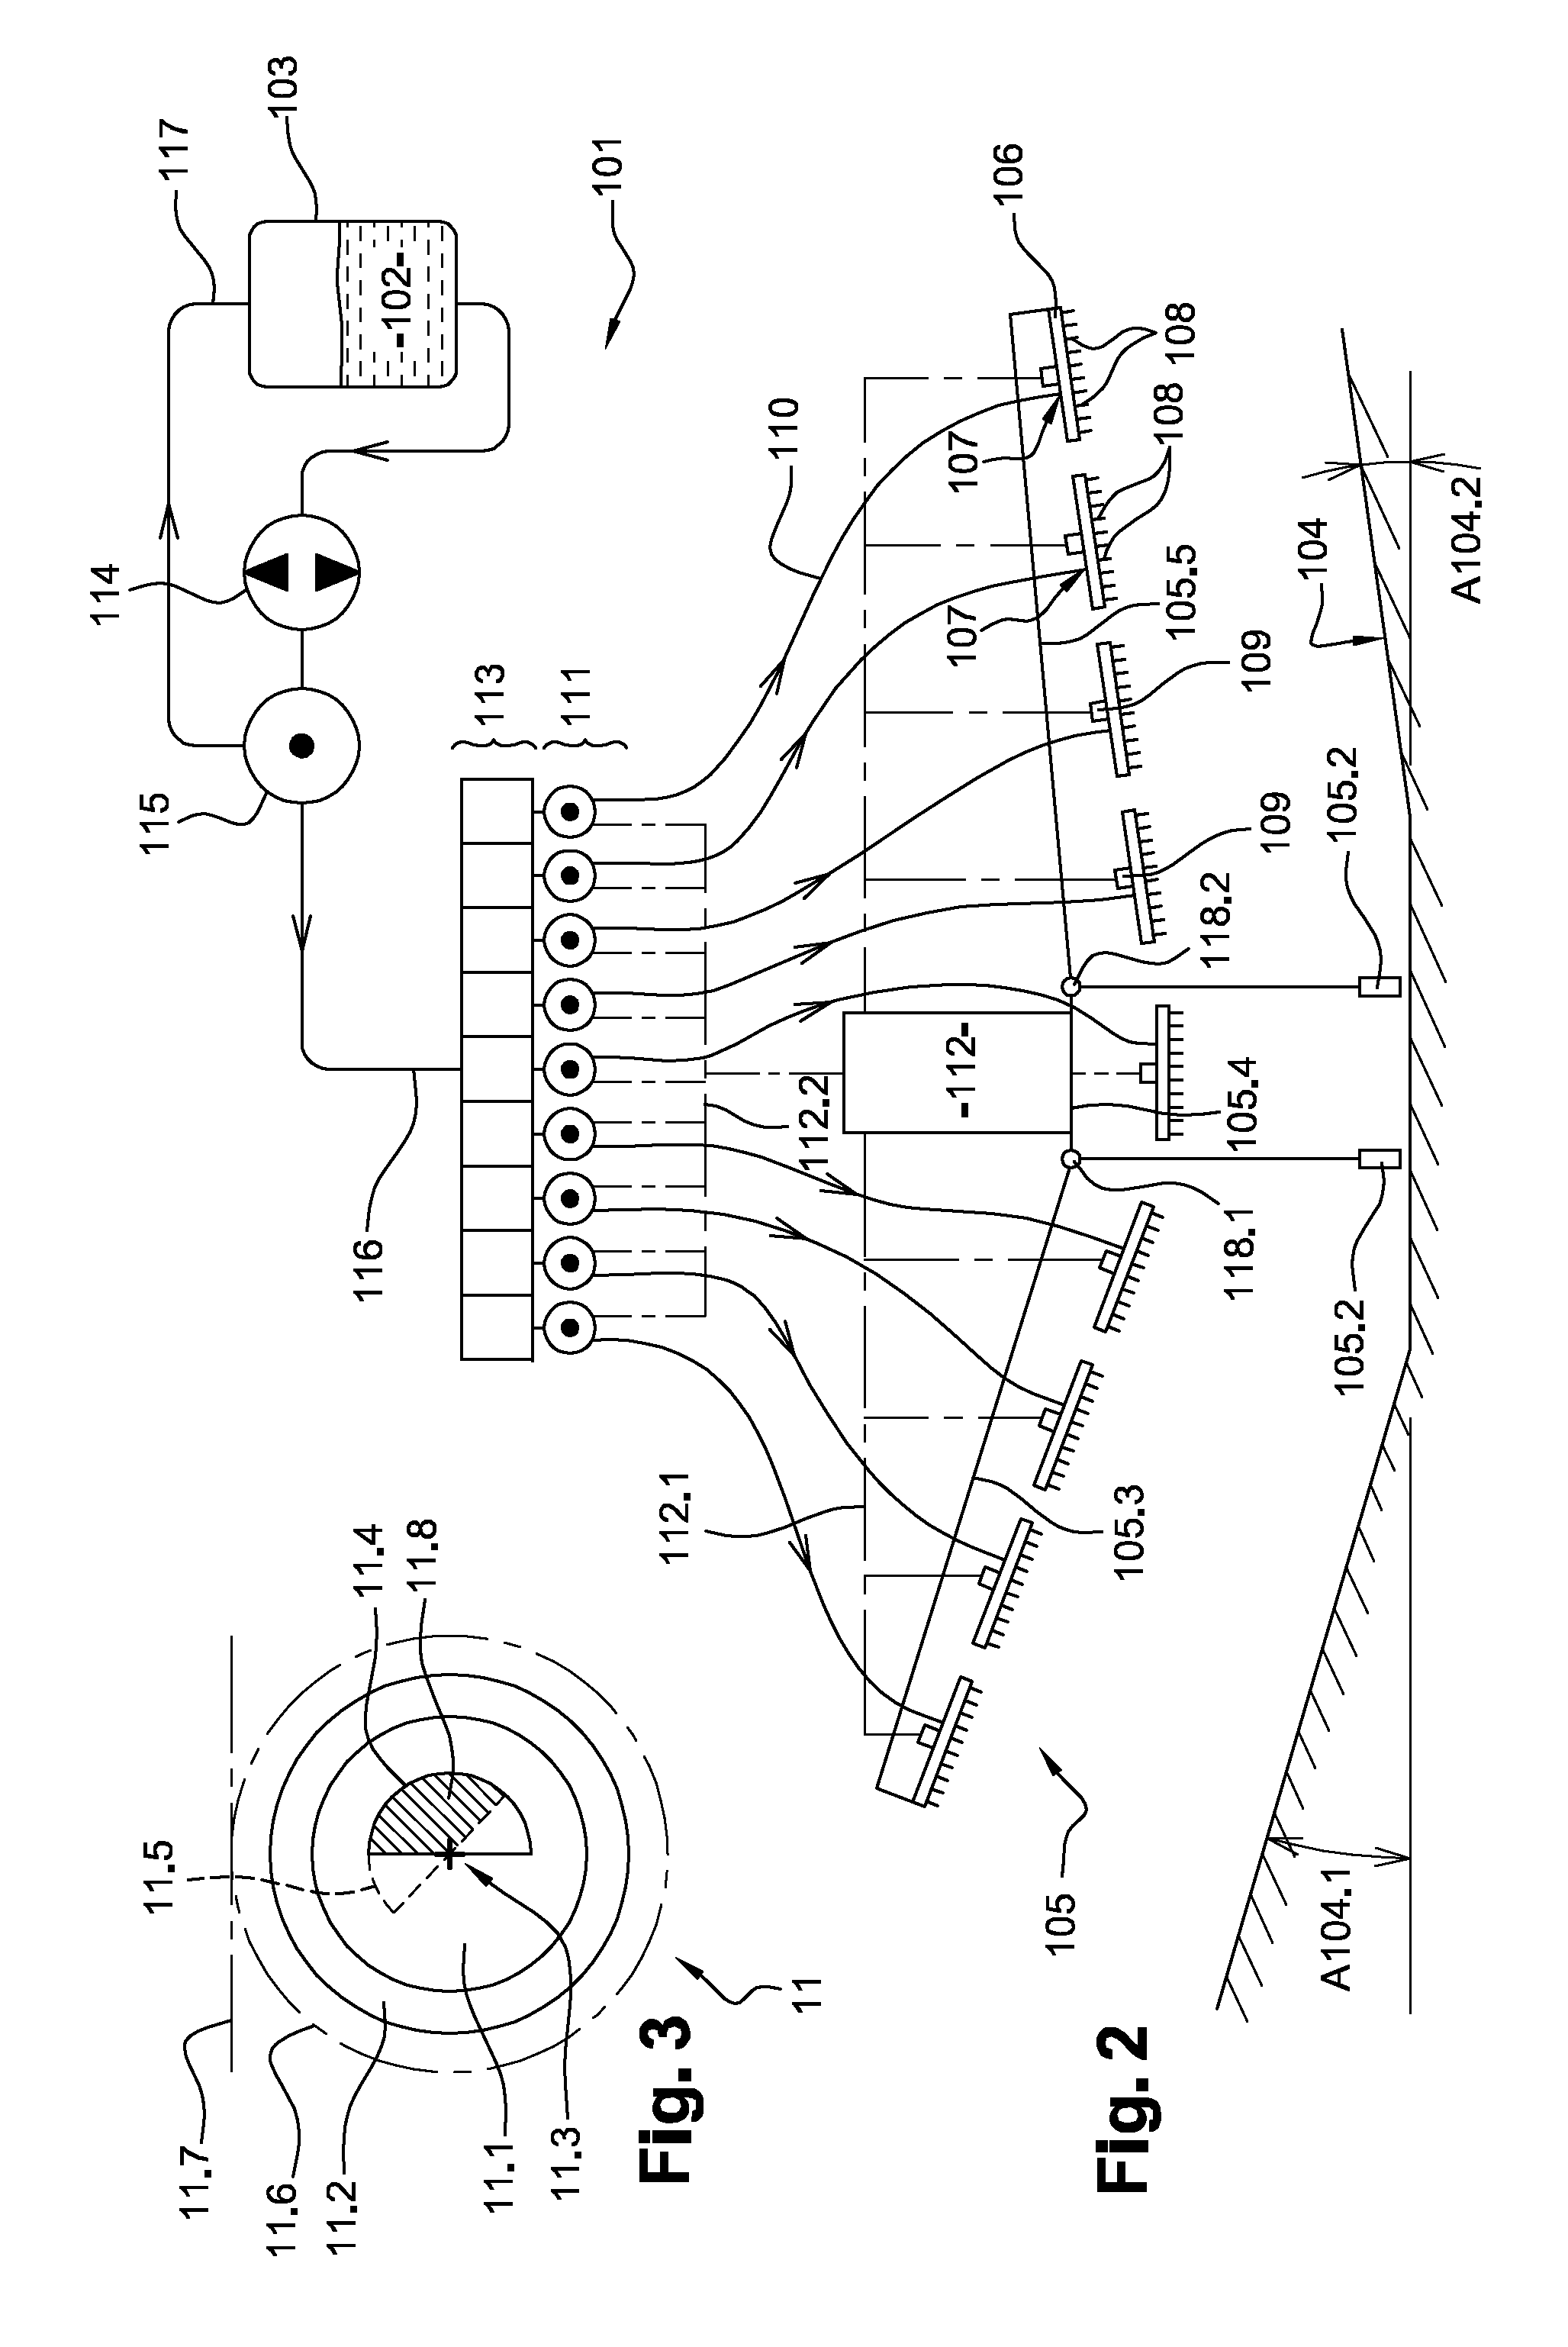 Device and method for dispensing a liquid product that is to be sprayed onto a surface